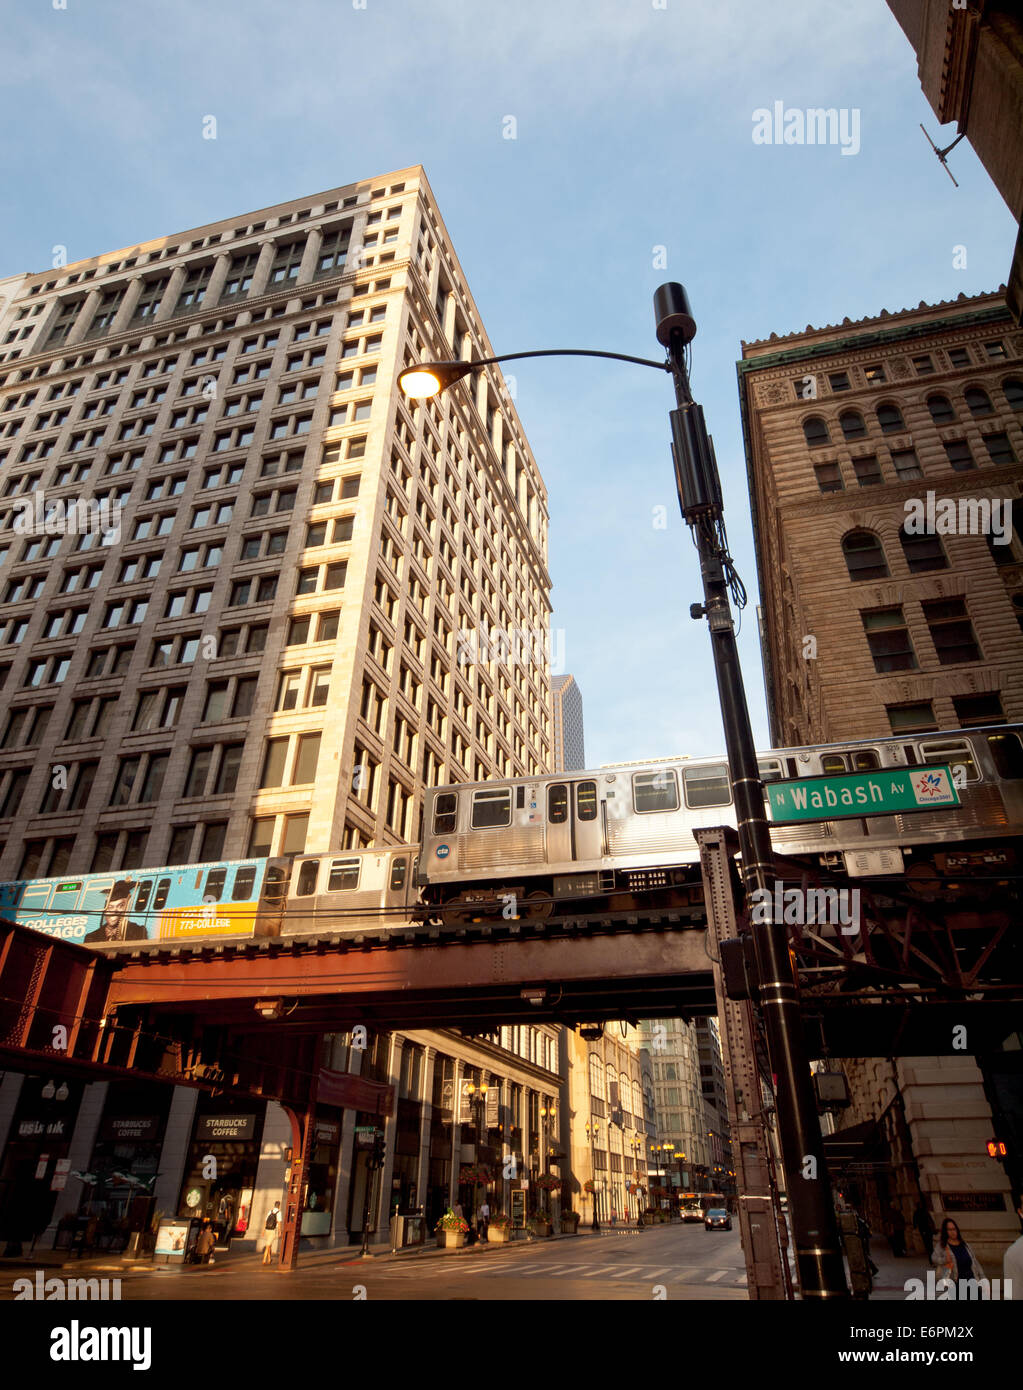 A view of Chicago 'L' train on an elevated track above Wabash Avenue in the Loop District of downtown Chicago. Stock Photo